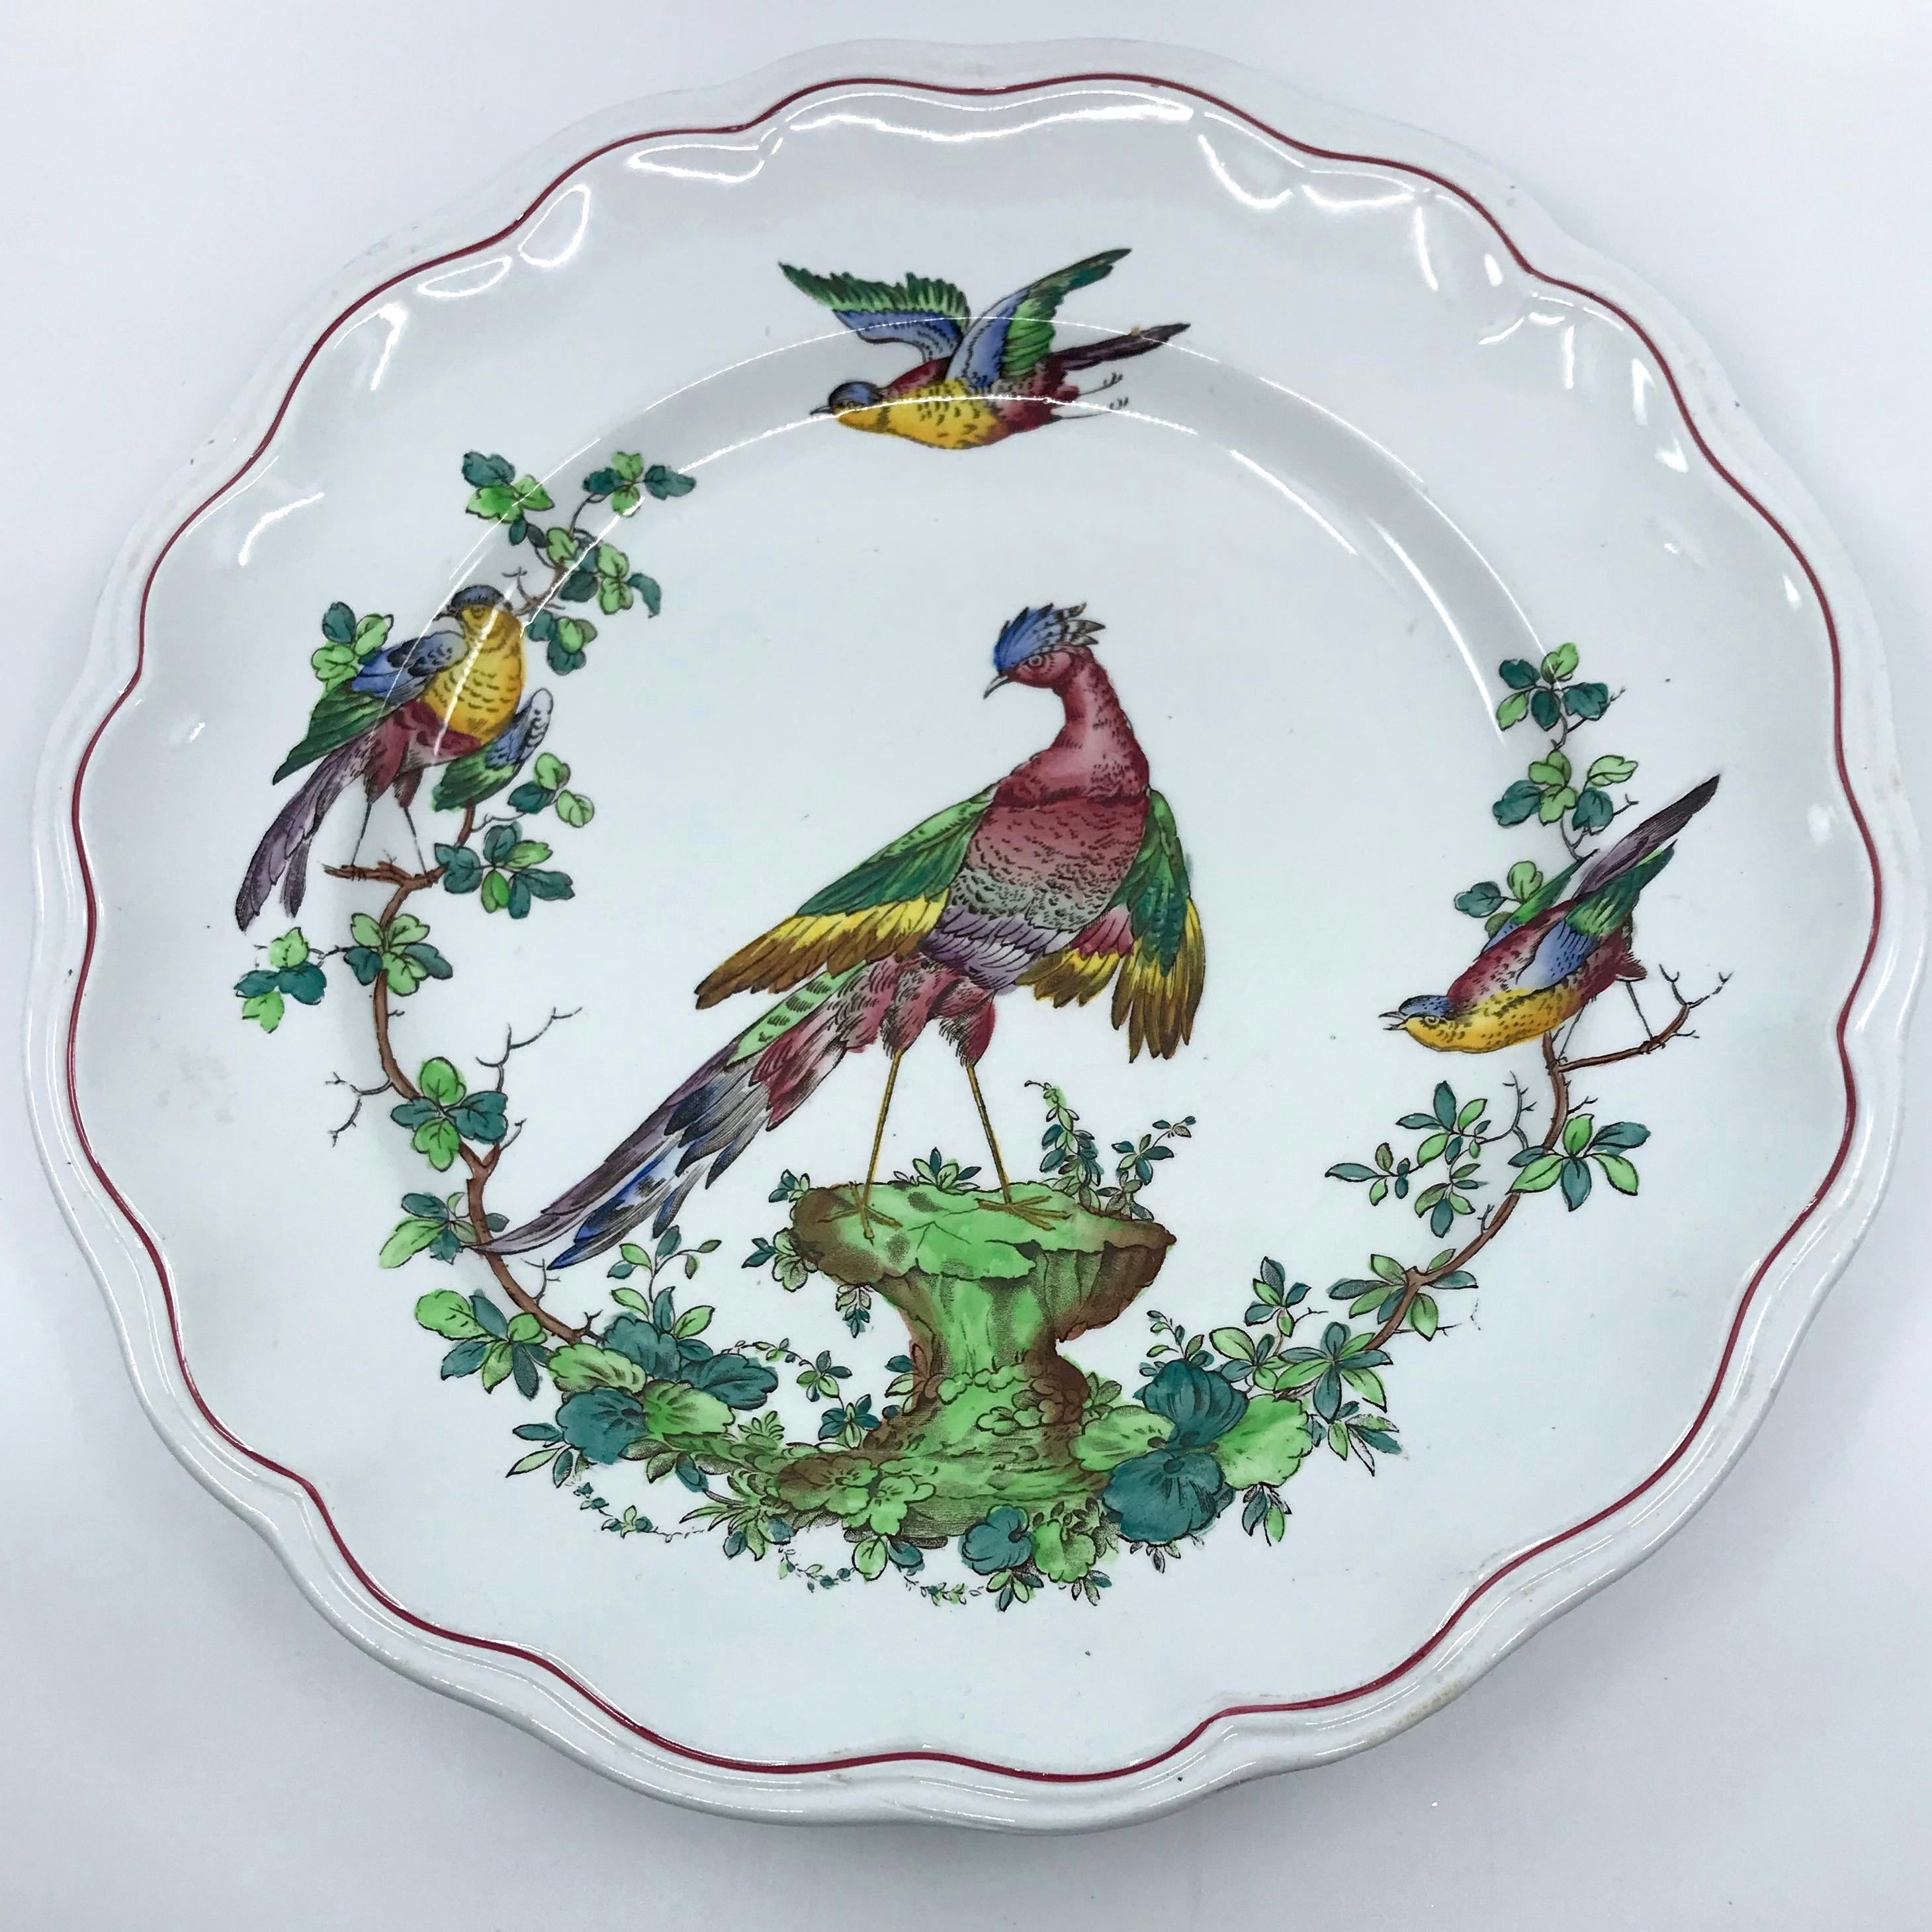 Pair Chelsea bird plates. Pair dinner plates with red painted shaped borders centering a large multicolored bird with smaller birds surrounding. England, early 20th century
Dimensions: 10.5